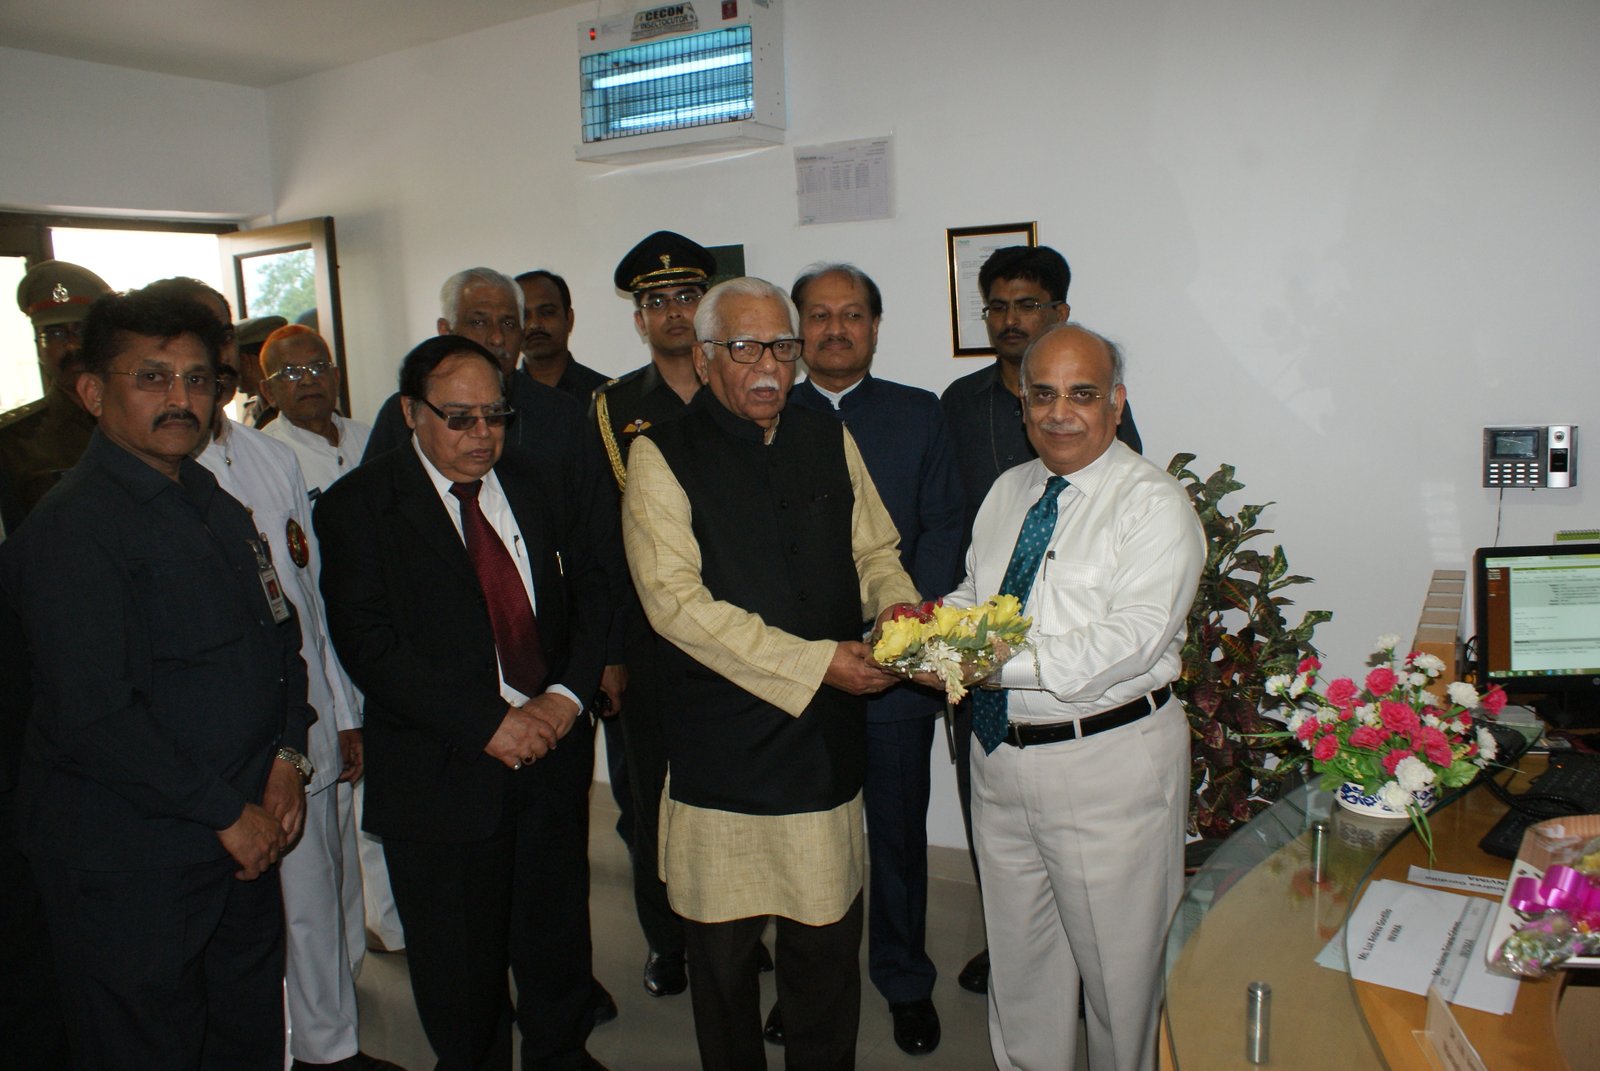 Uttar Pradesh Governor, Mr Ram Naik (M) being received by(R) Dr J N Verma, MD, Life Care Innovations. Also seen in pic (L) is Dr P K Seth, CEO, Lucknow Biotech Park.